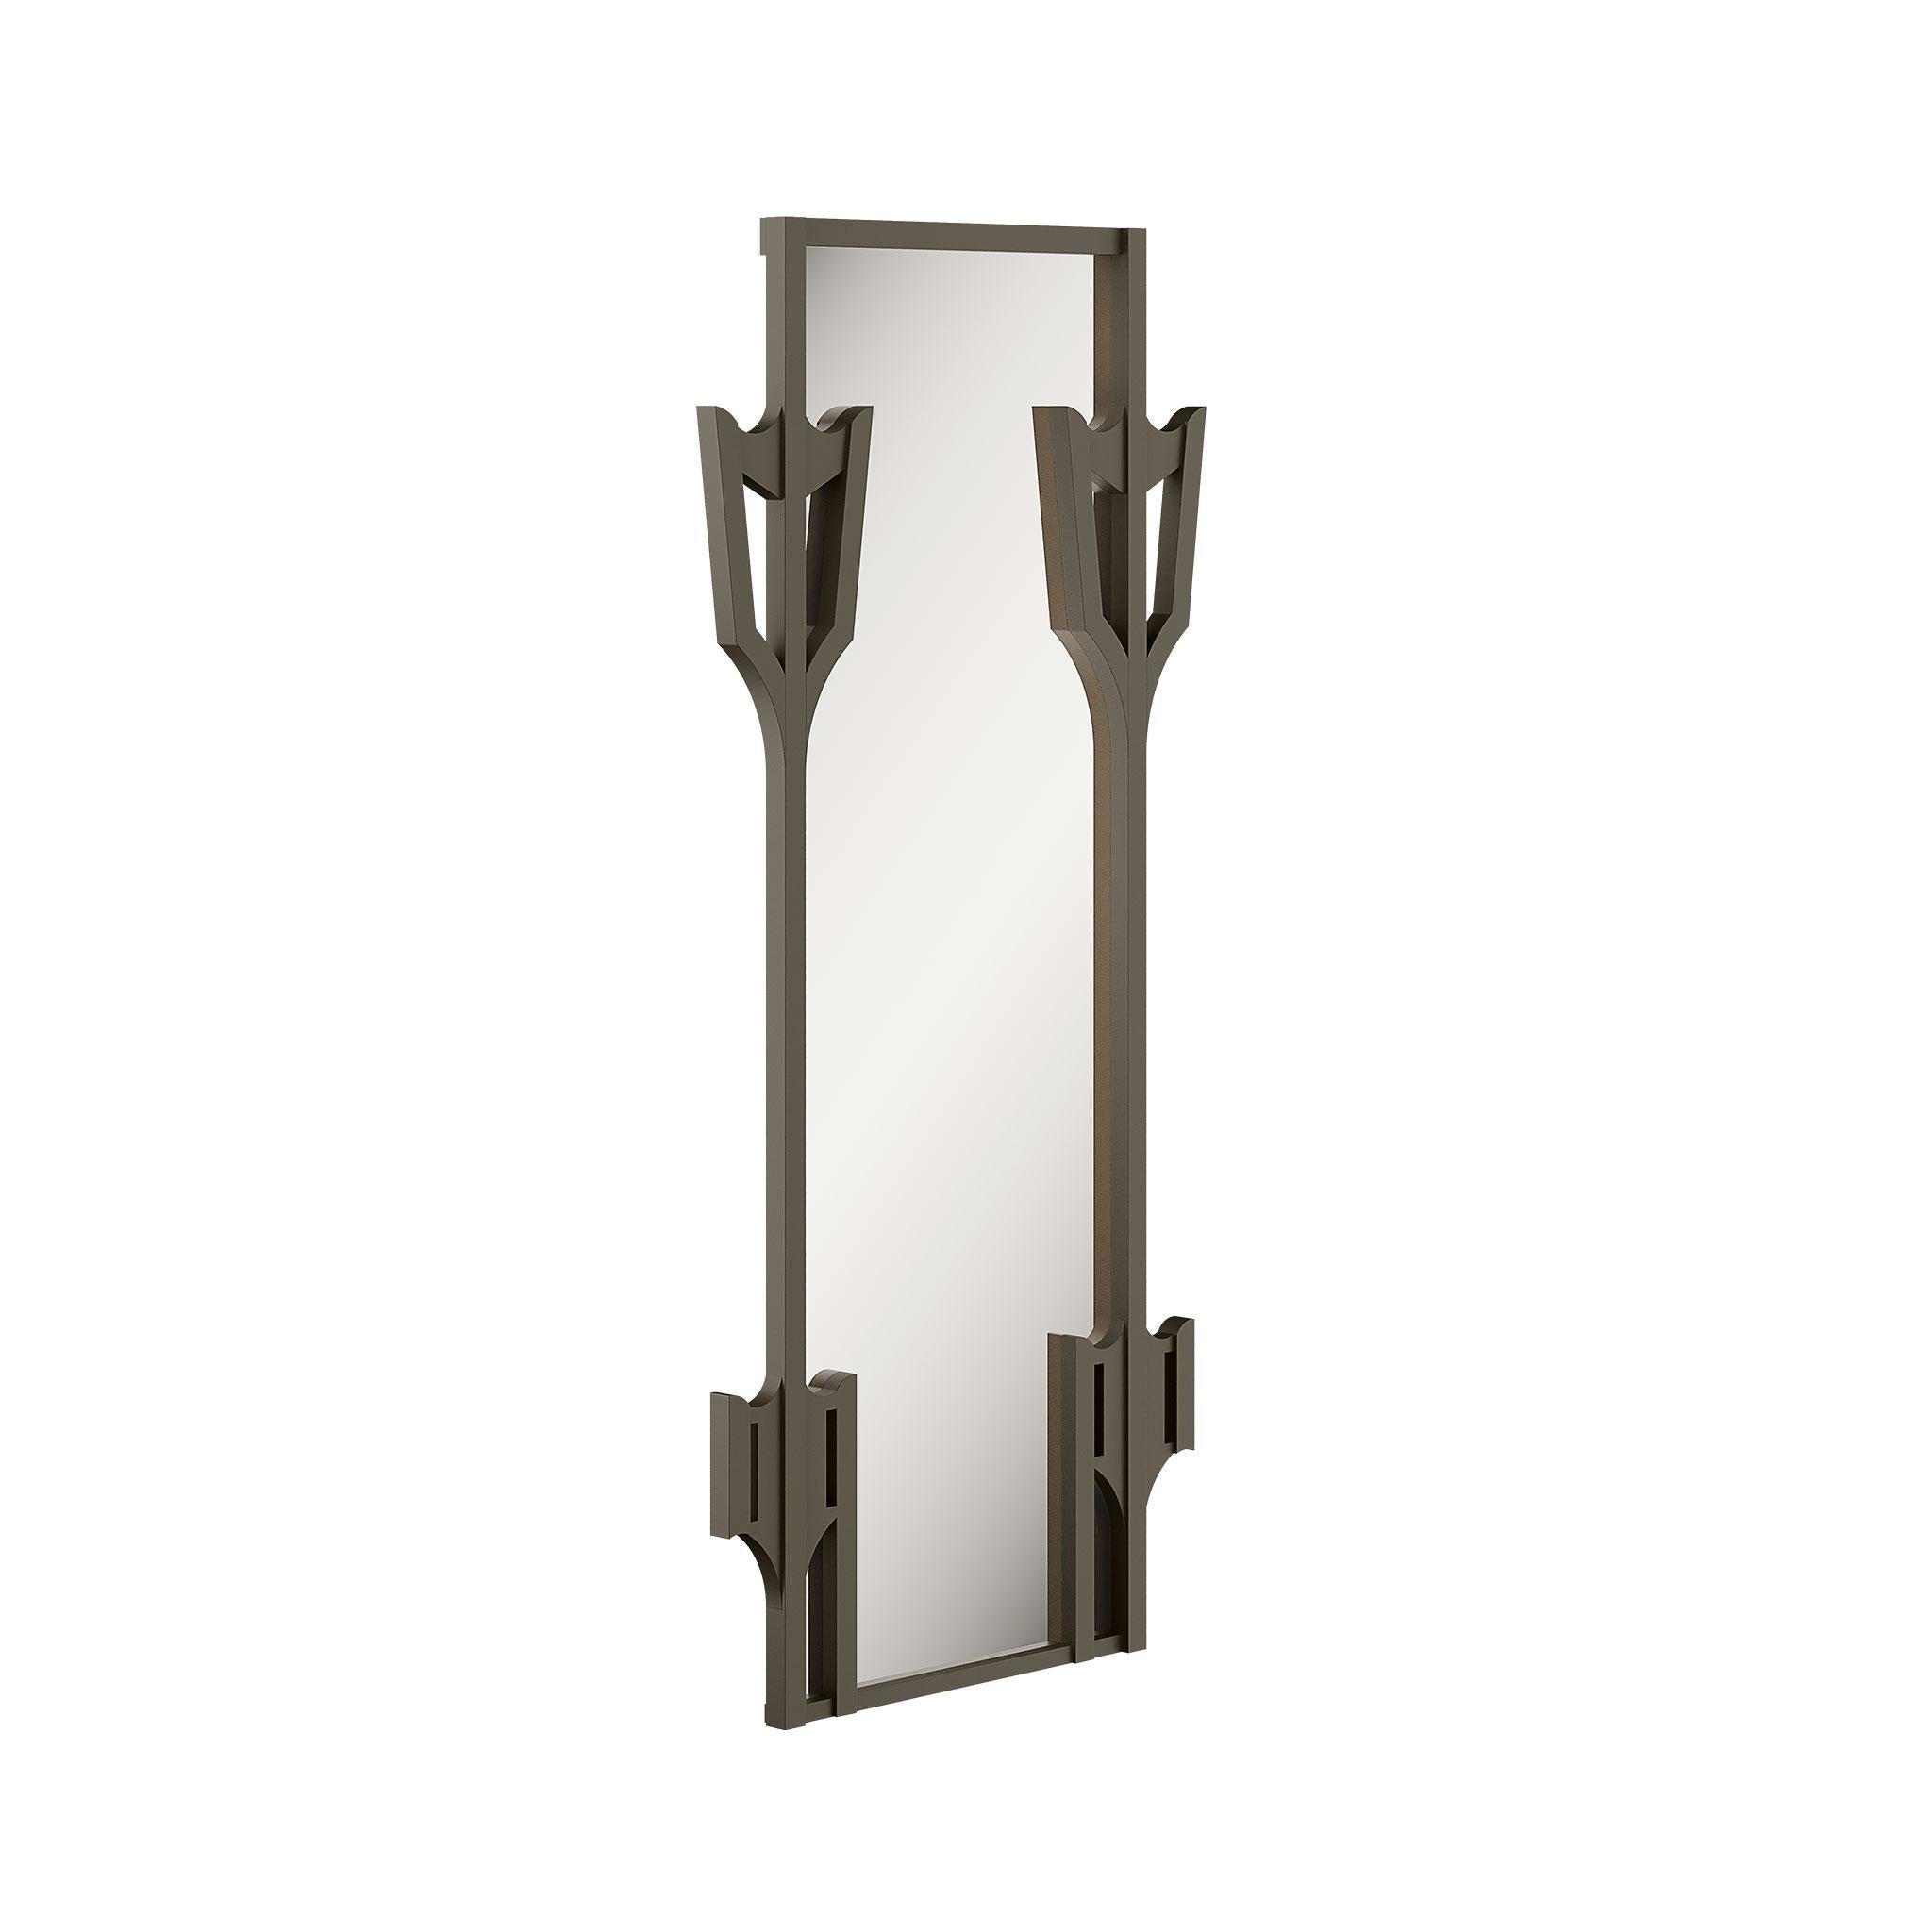 Add a distinctly elegant piece to your decor with our Contemporary Floor Mirror in Lacquered Wood, meticulously hand-carved. This mirror is not just a functional item but a work of art that reflects the balance between modern design and artisanal